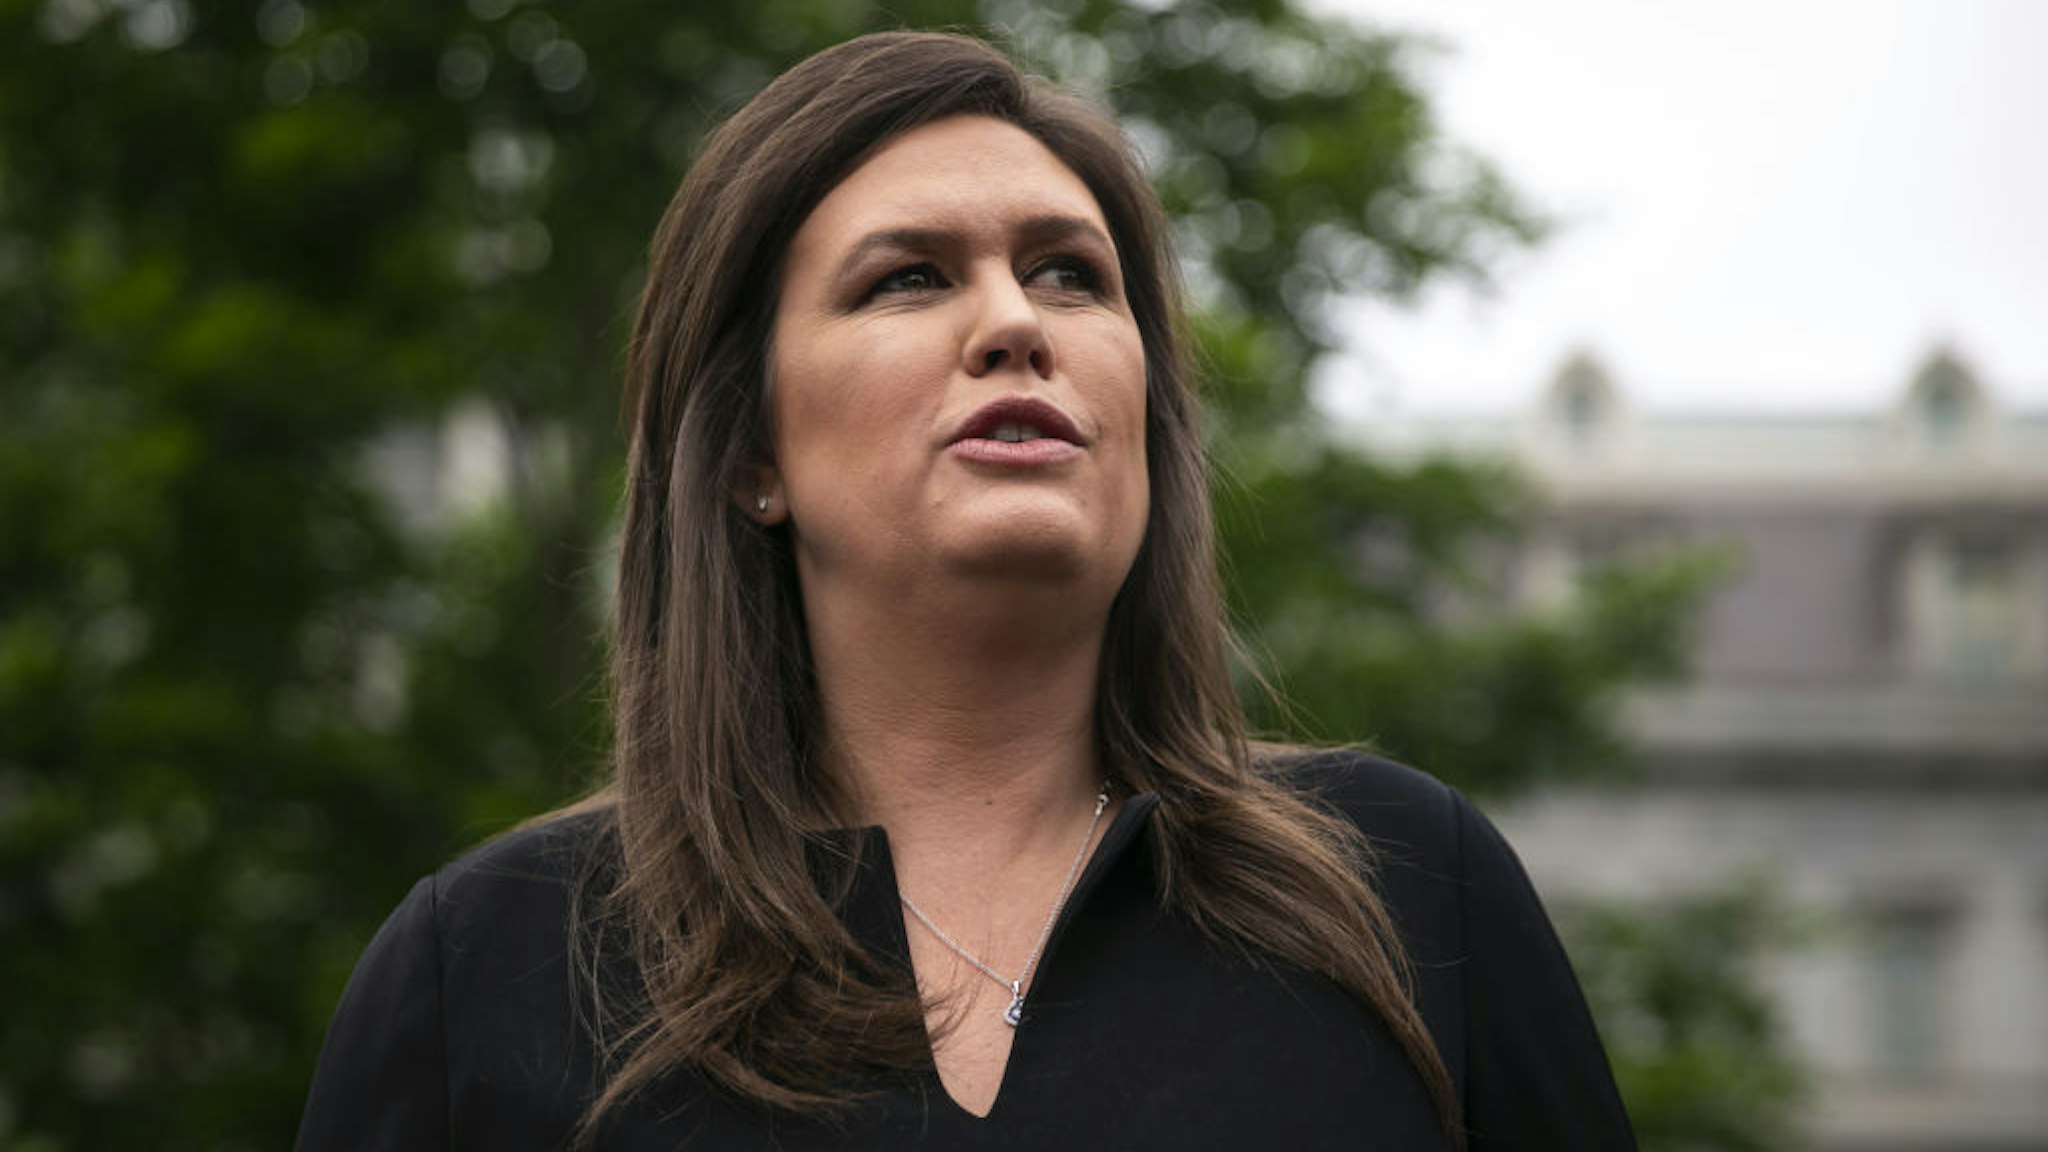 Sarah Huckabee Sanders, White House press secretary, speaks to members of the media outside the White House in Washington, D.C., U.S., on Wednesday, May 8, 2019. The Department of Health and Human Services finalized a rule Wednesday that would require drugmakers to disclose a drug's cost if its price before rebates and discounts is above $35 for a month's supply or the usual course of therapy.